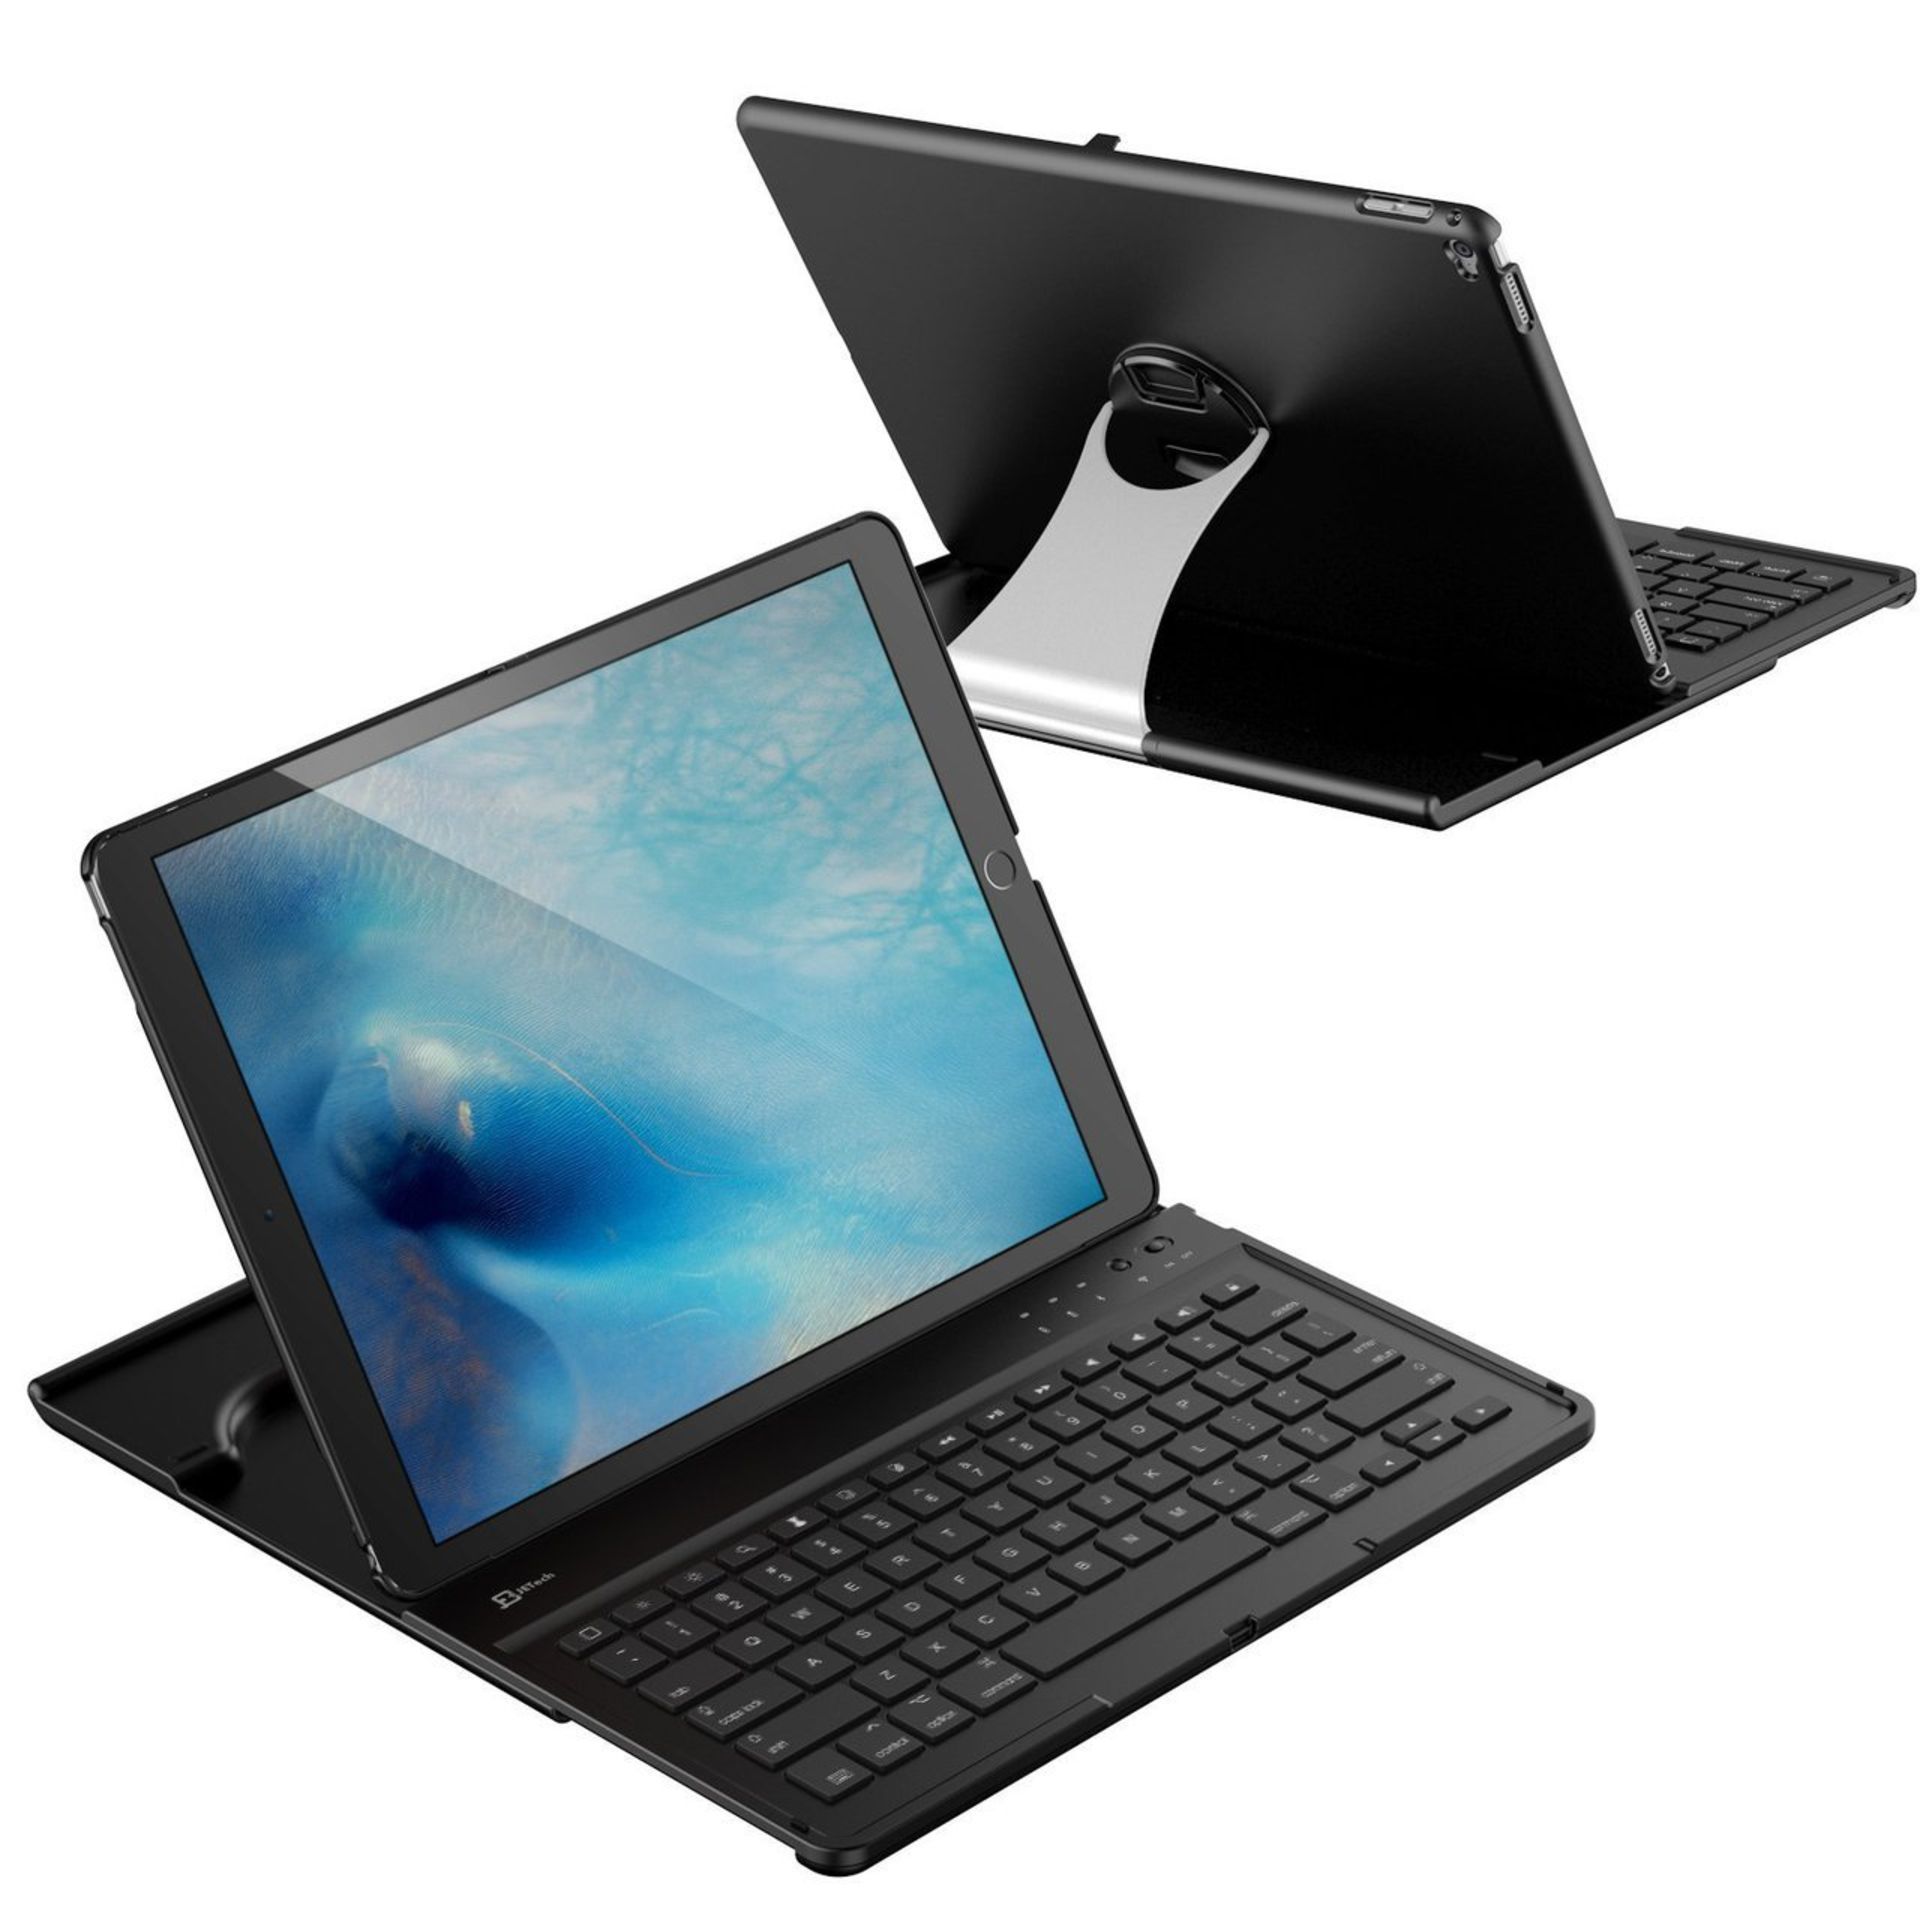 V Brand New Bluetooth Keyboard with Multi Position Stand for Ipad Pro Amazon Price £21.95 Ebay £62.